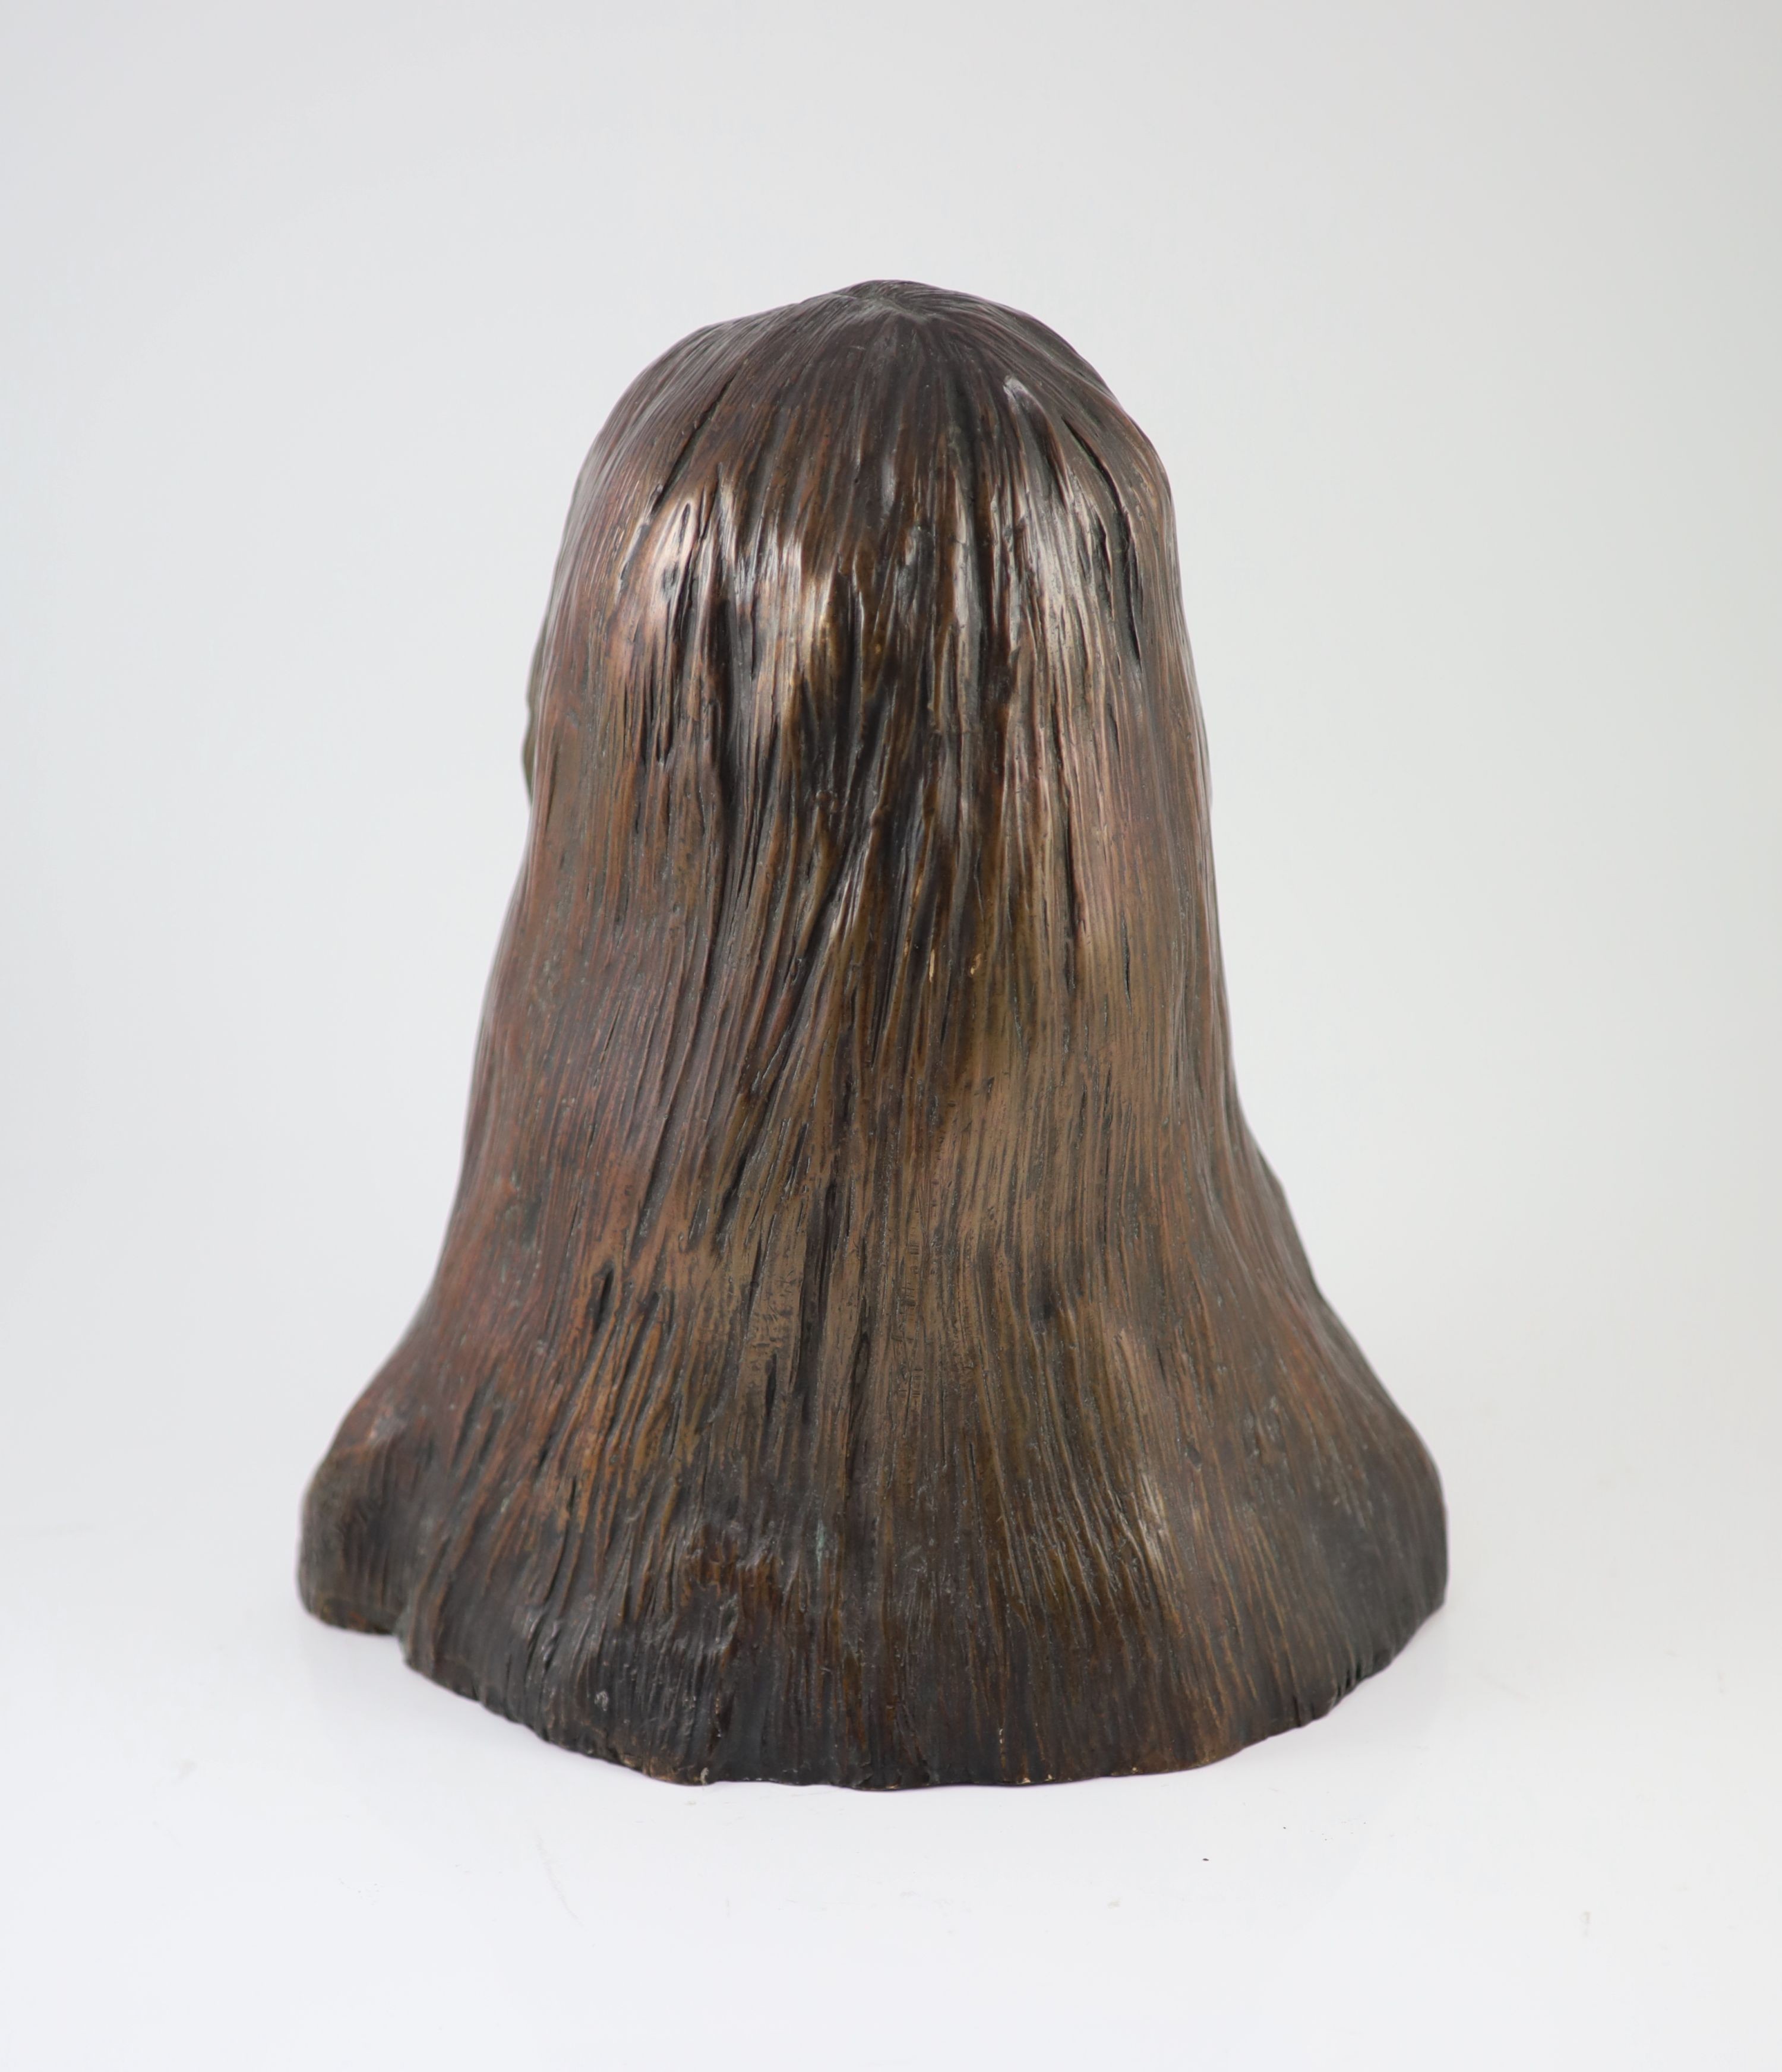 James Osborne (1940-1992), bronze, Head of a young woman with flowing hair H 36cm.